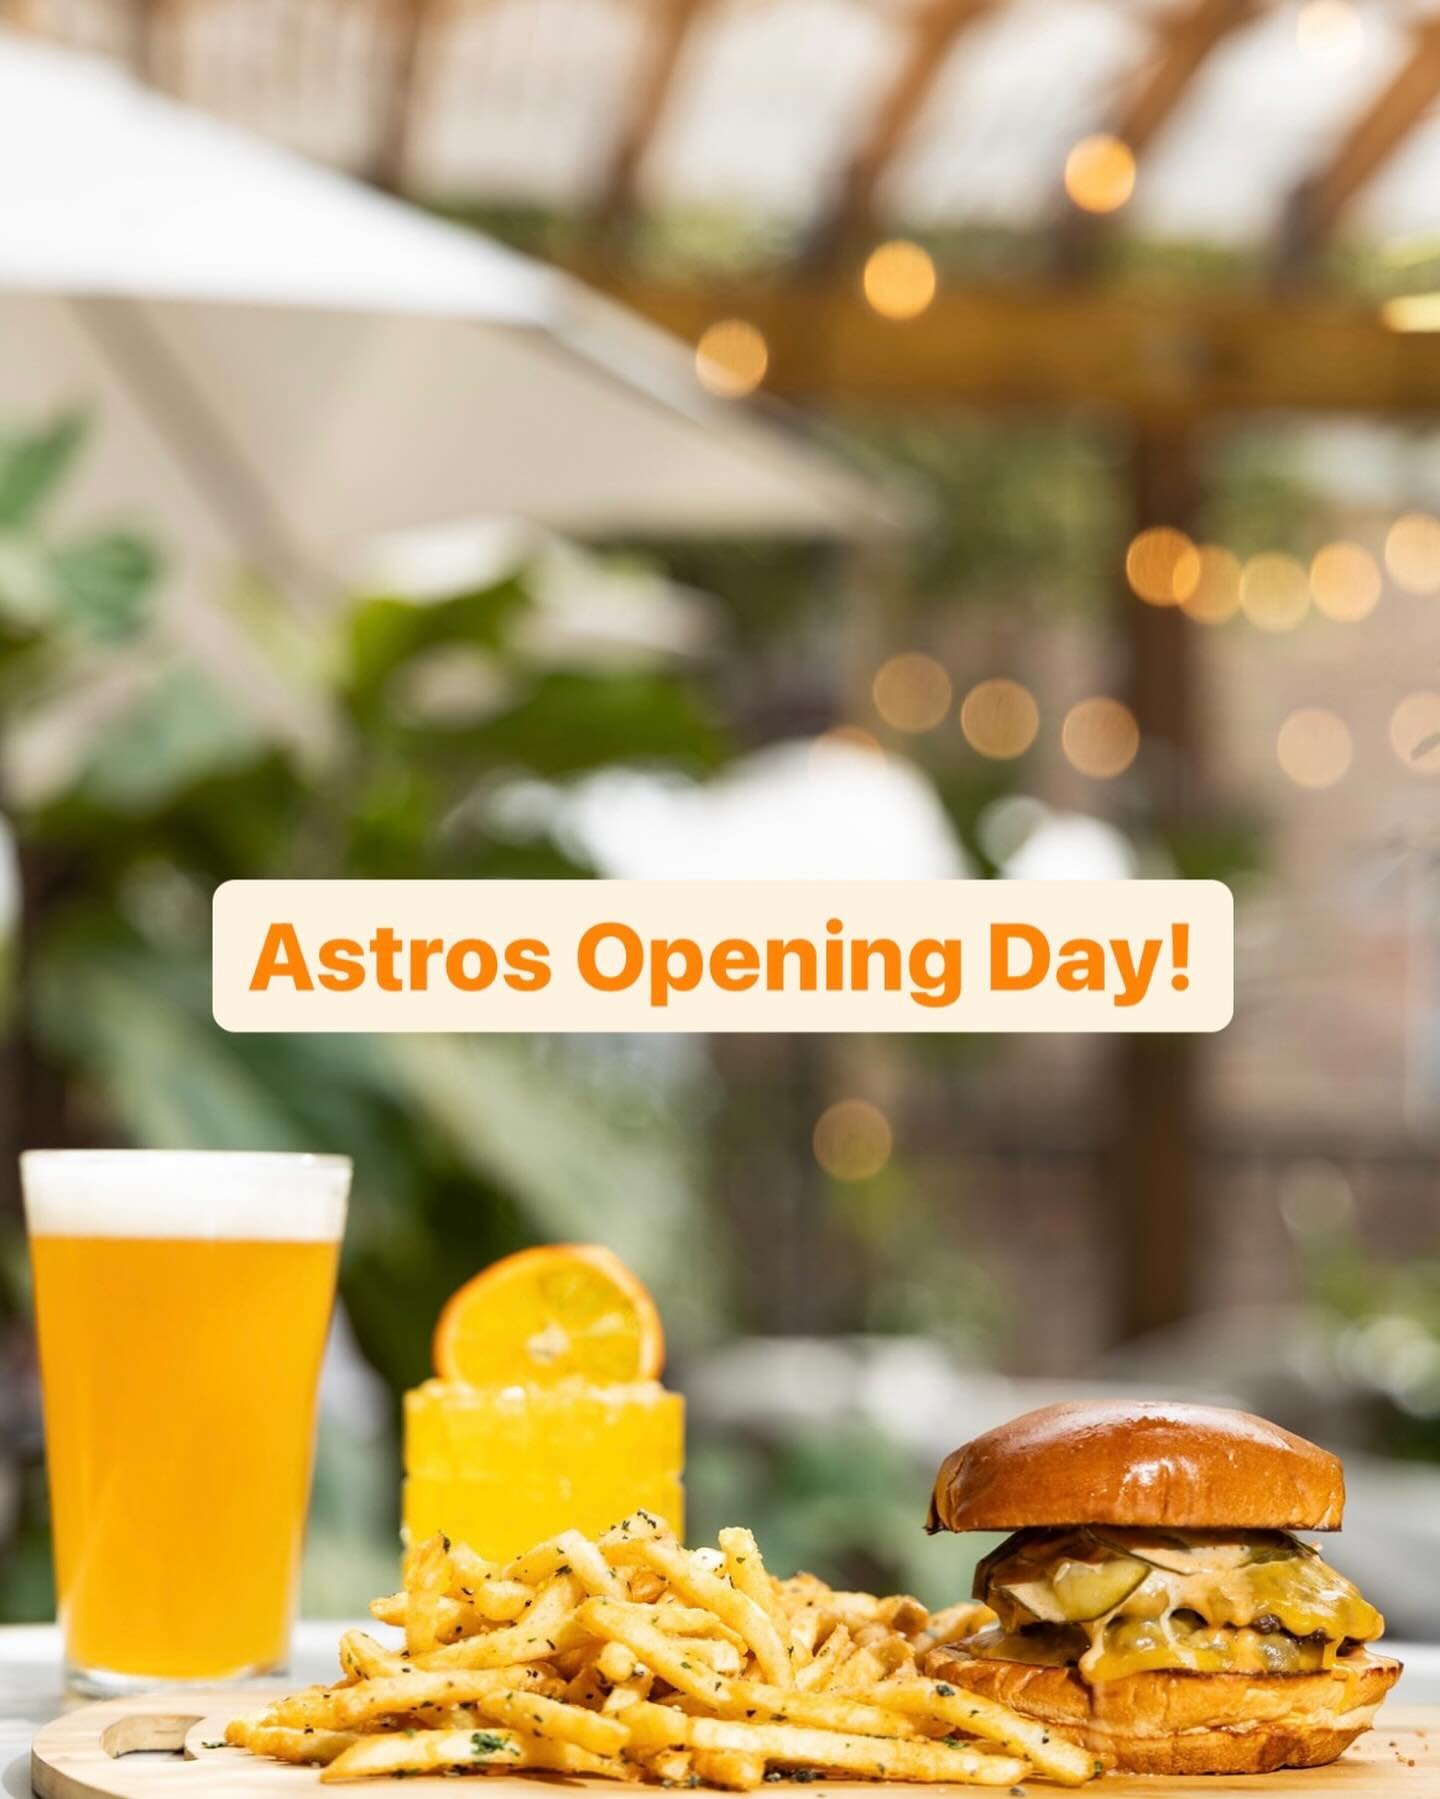 Astros Opening Day! Swing by for a Smash Burger or Brisket Grilled Cheese and enjoy an ice cold beer or Crush City Margarita while soaking up the sun on the patio at Heights &amp; Co! 😎 Let&rsquo;s go &lsquo;Stros! ⚾️